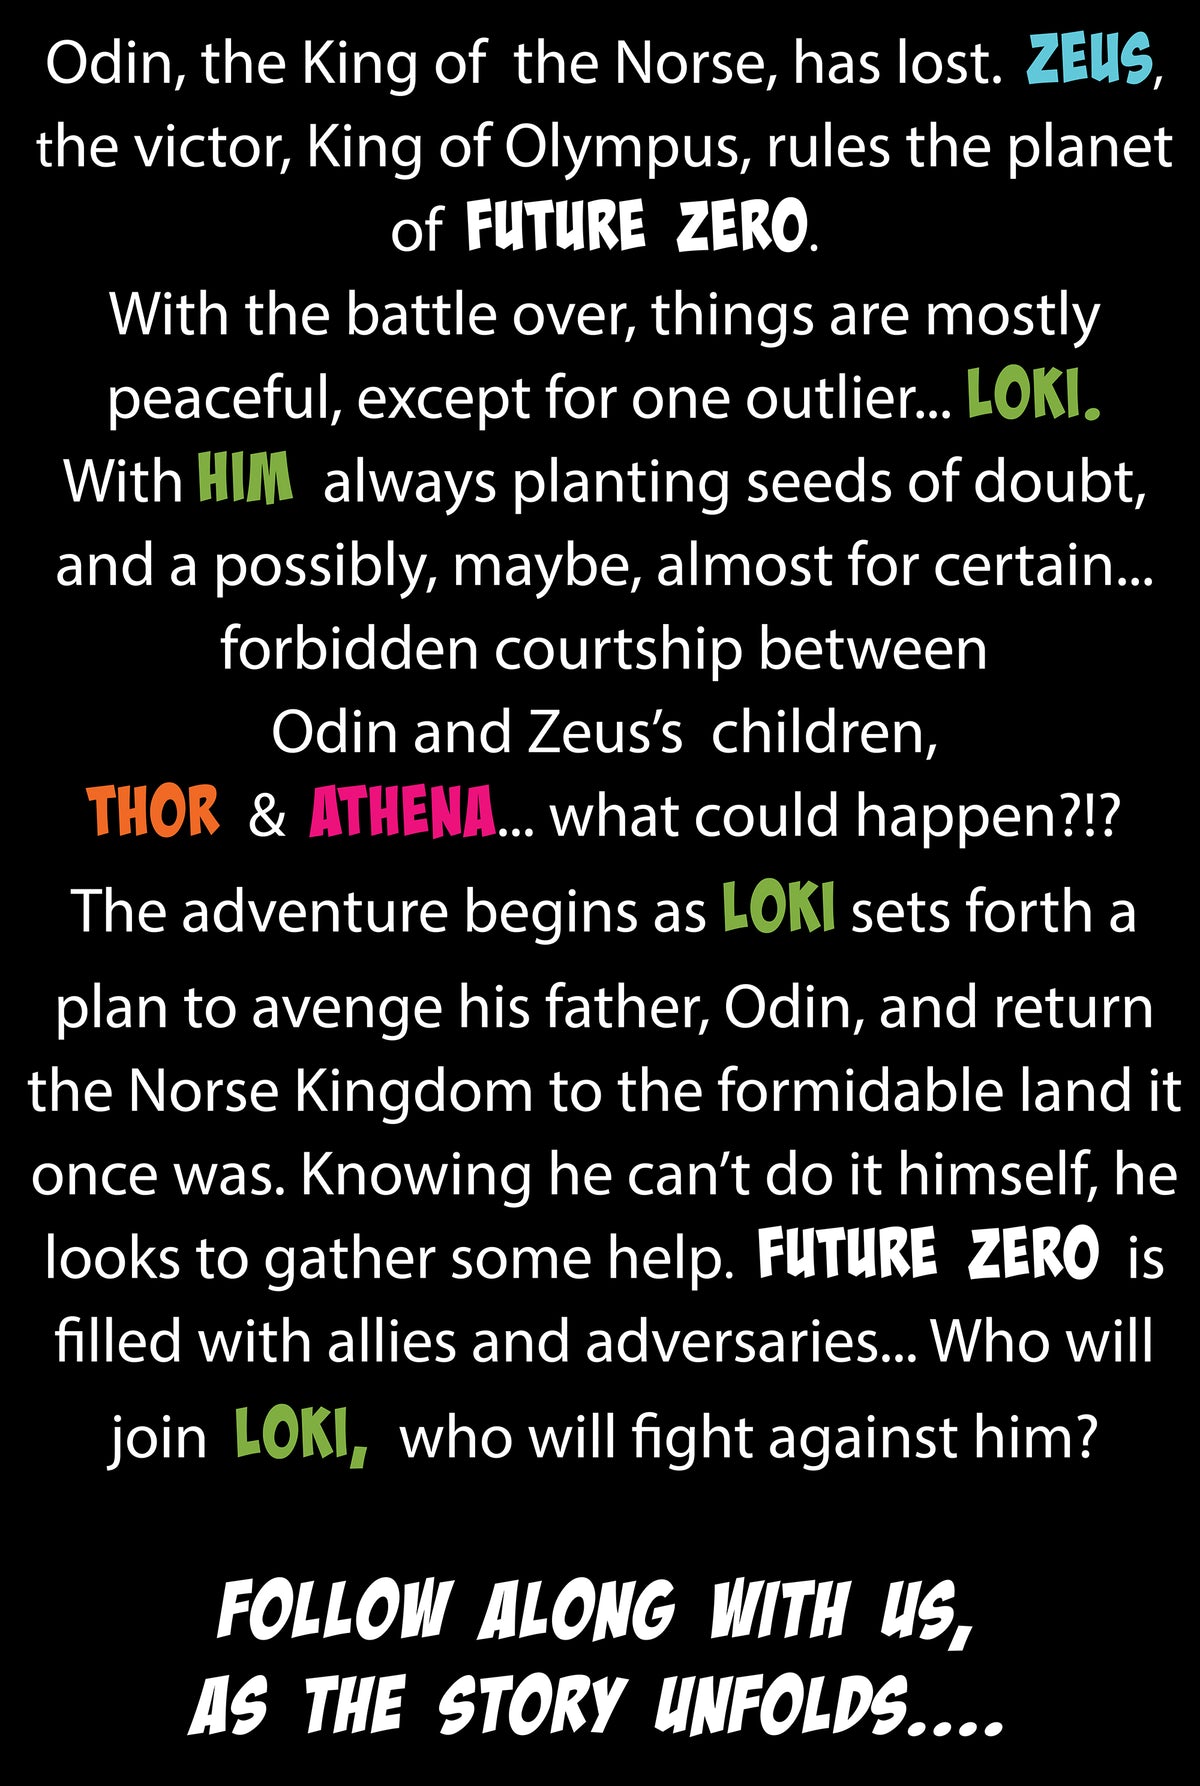 Text describing Zeus' victory over Odin, Loki's plan to avenge his father, Athena and Thor's courtship and says "follow along with us, as the story unfolds"